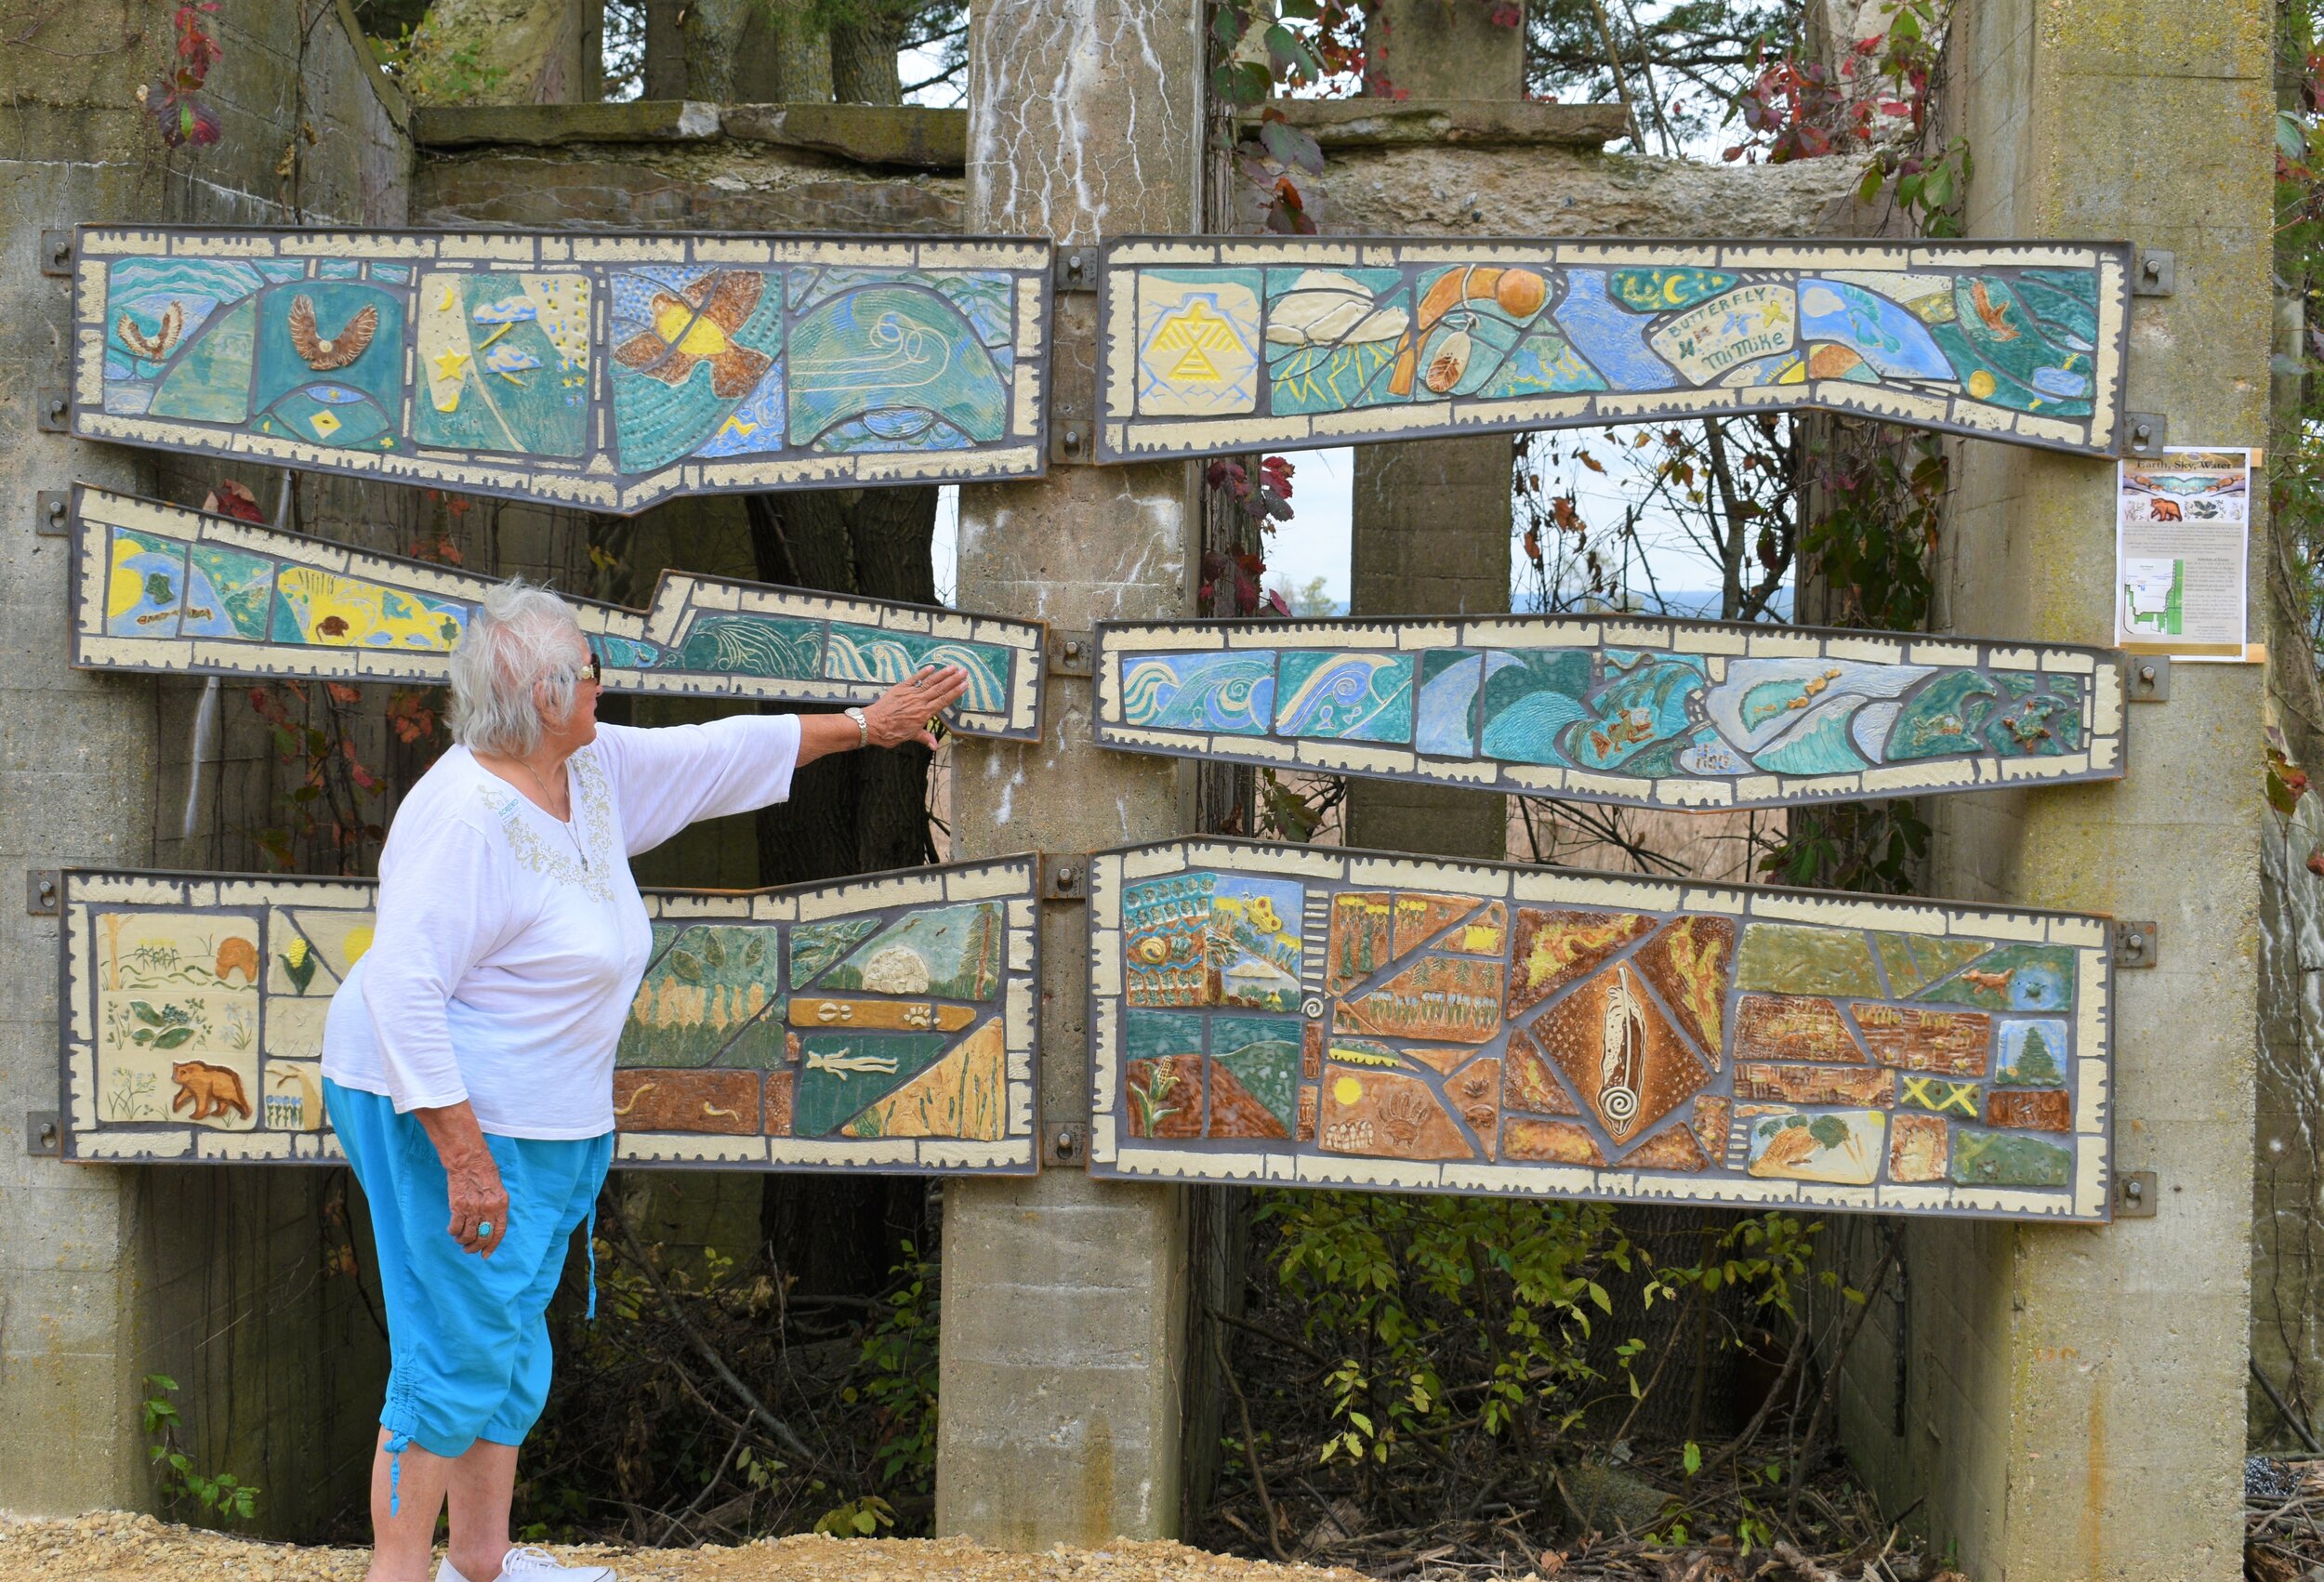  Hoocąk (Ho-Chunk) elder Connie Lonetree admiring the work of many families that contributed to the mural. 